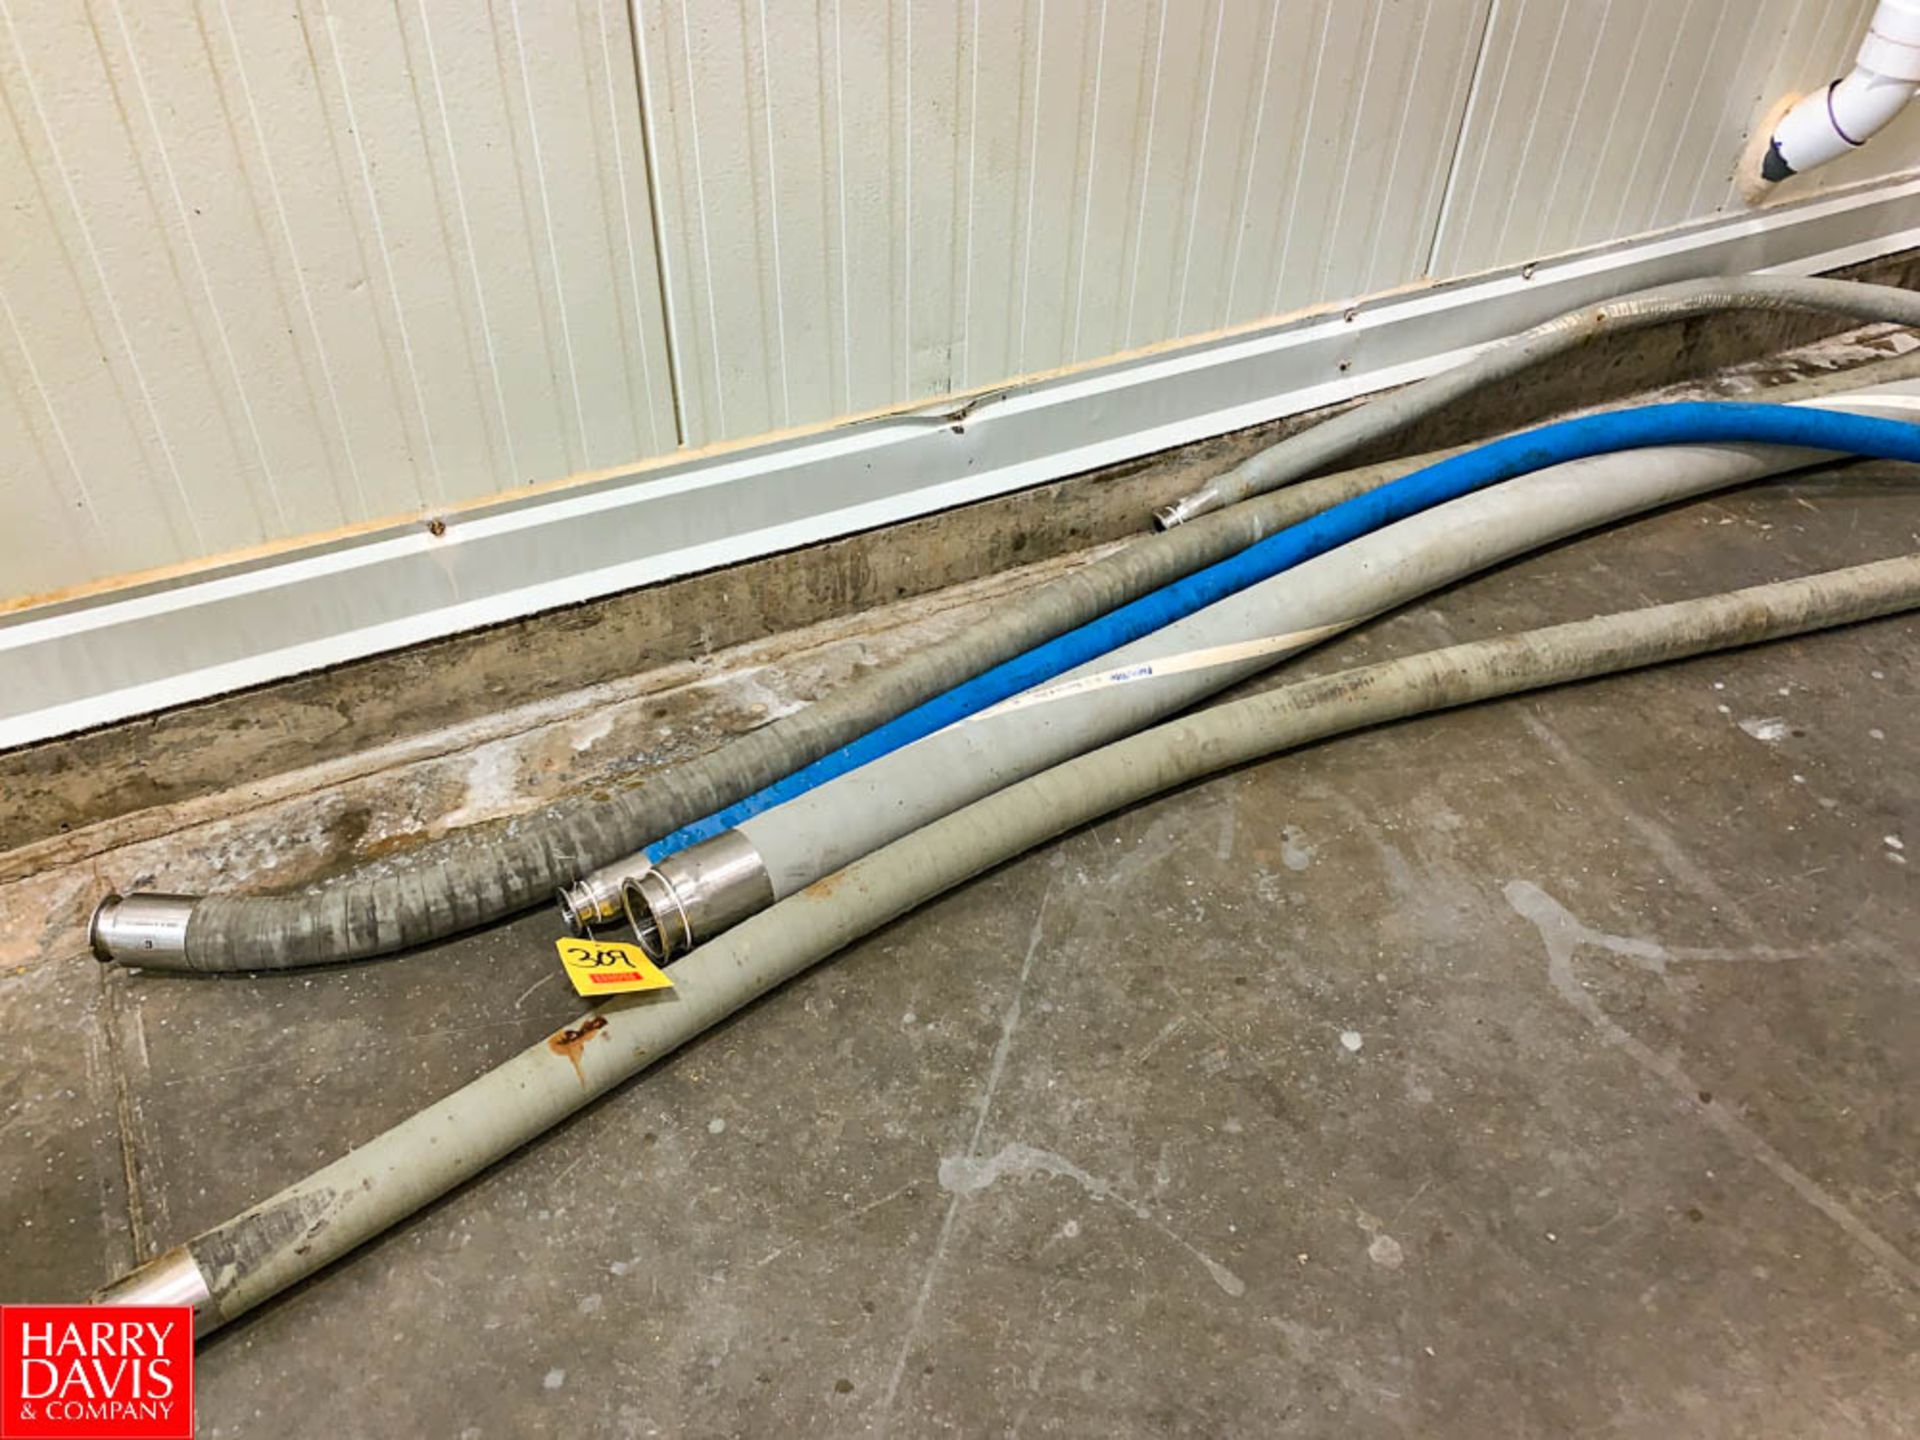 Suction and Discharge Hoses Rigging Fee: $ 40